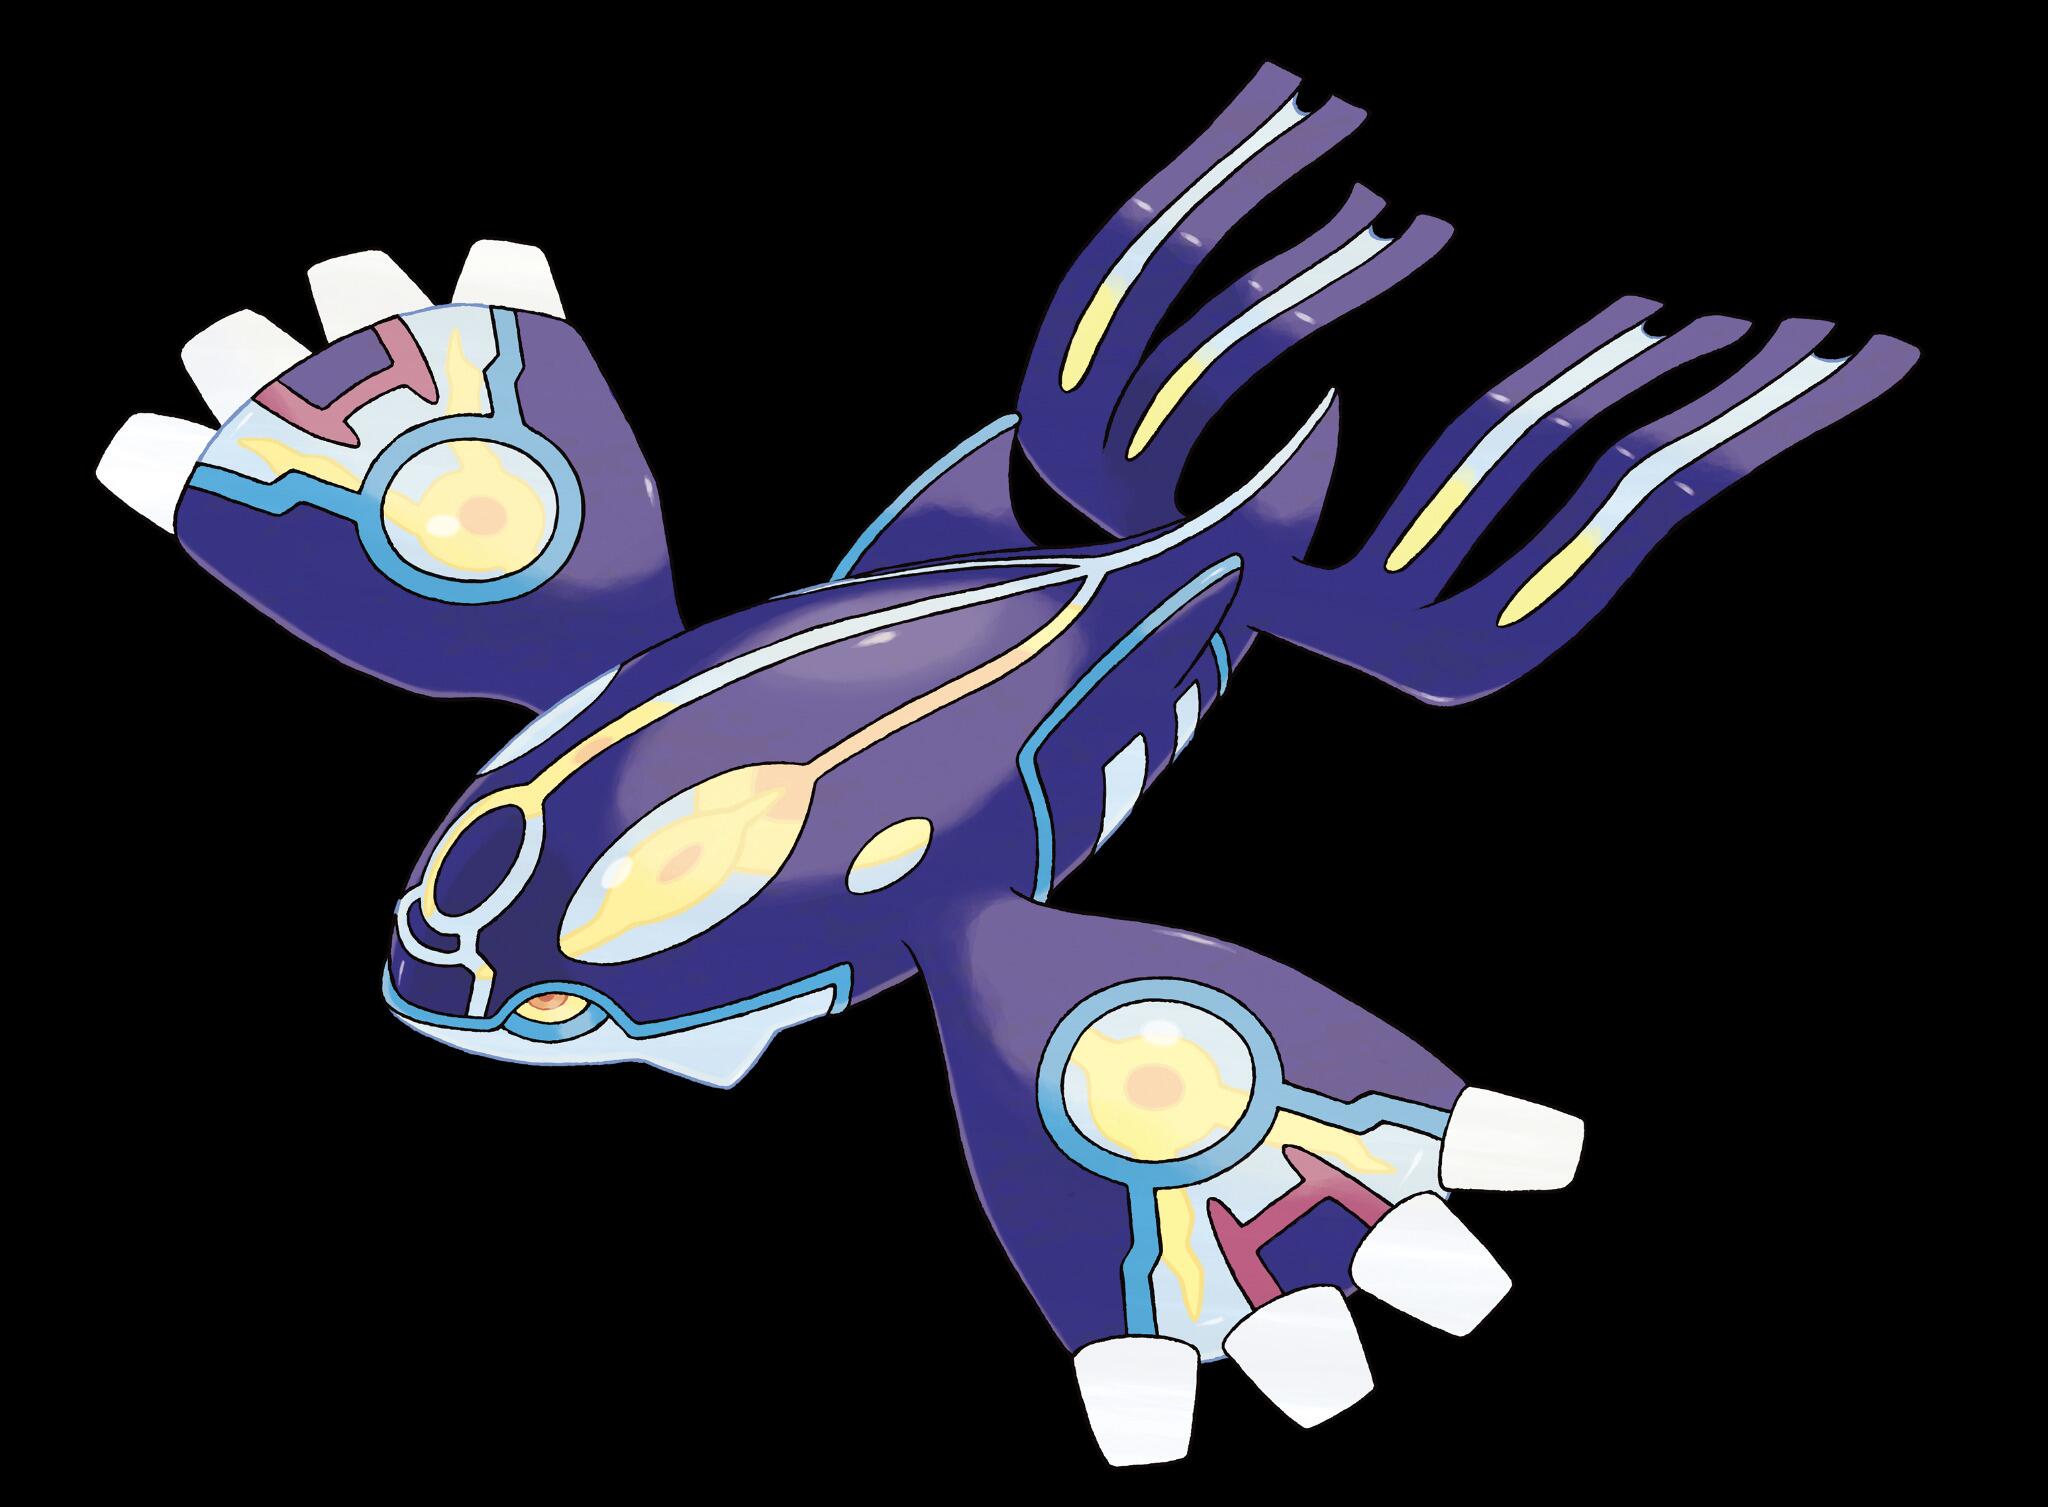 “Serebii Picture: Official artwork for Primal Kyogre http://t.co/nq4NYMD7rg...